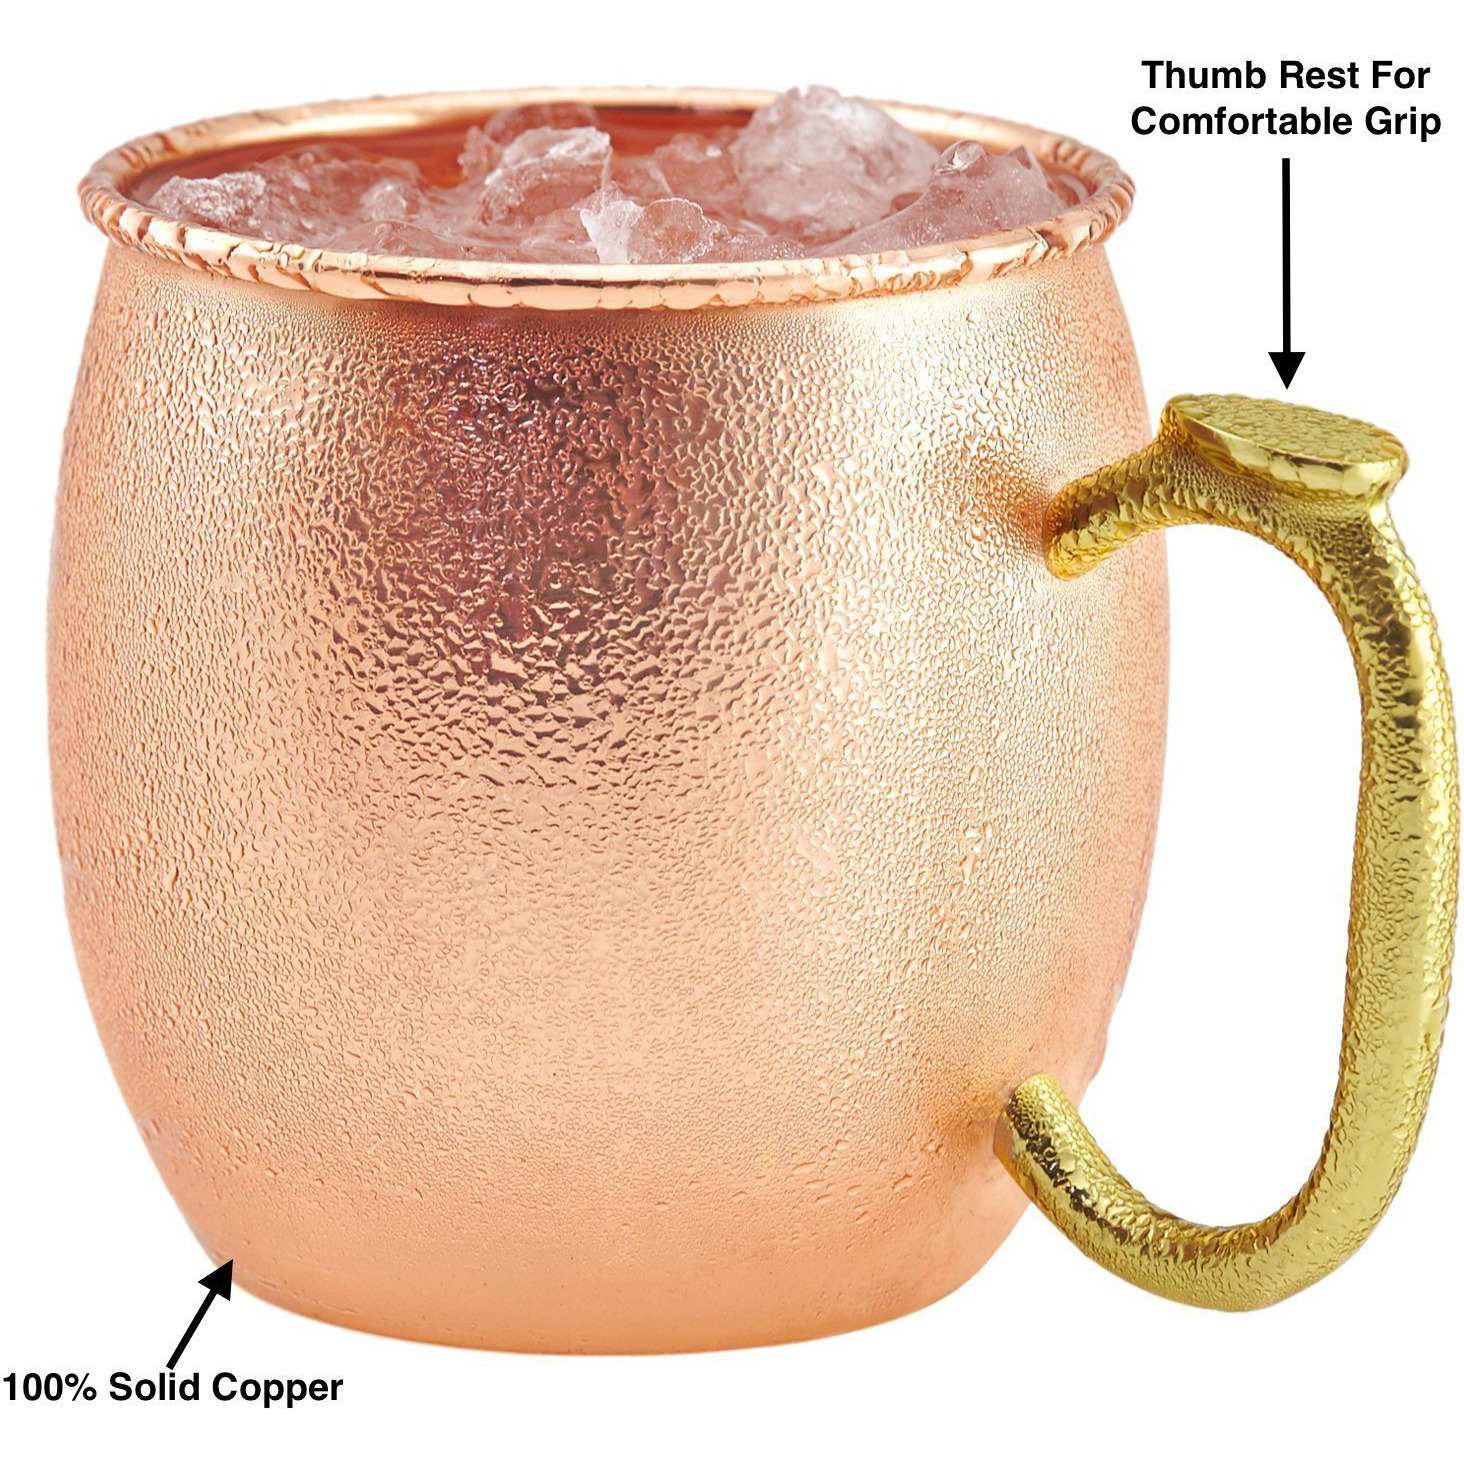 Set of 3 - Prisha India Craft B. Pure Copper Moscow Mules Copper Mug with Thumb Handle 475 ML / 16 oz - Cocktail Cup - Christmas Gift Bonus with WOODEN KEYRING, Copper Straw, Beaded Coaster